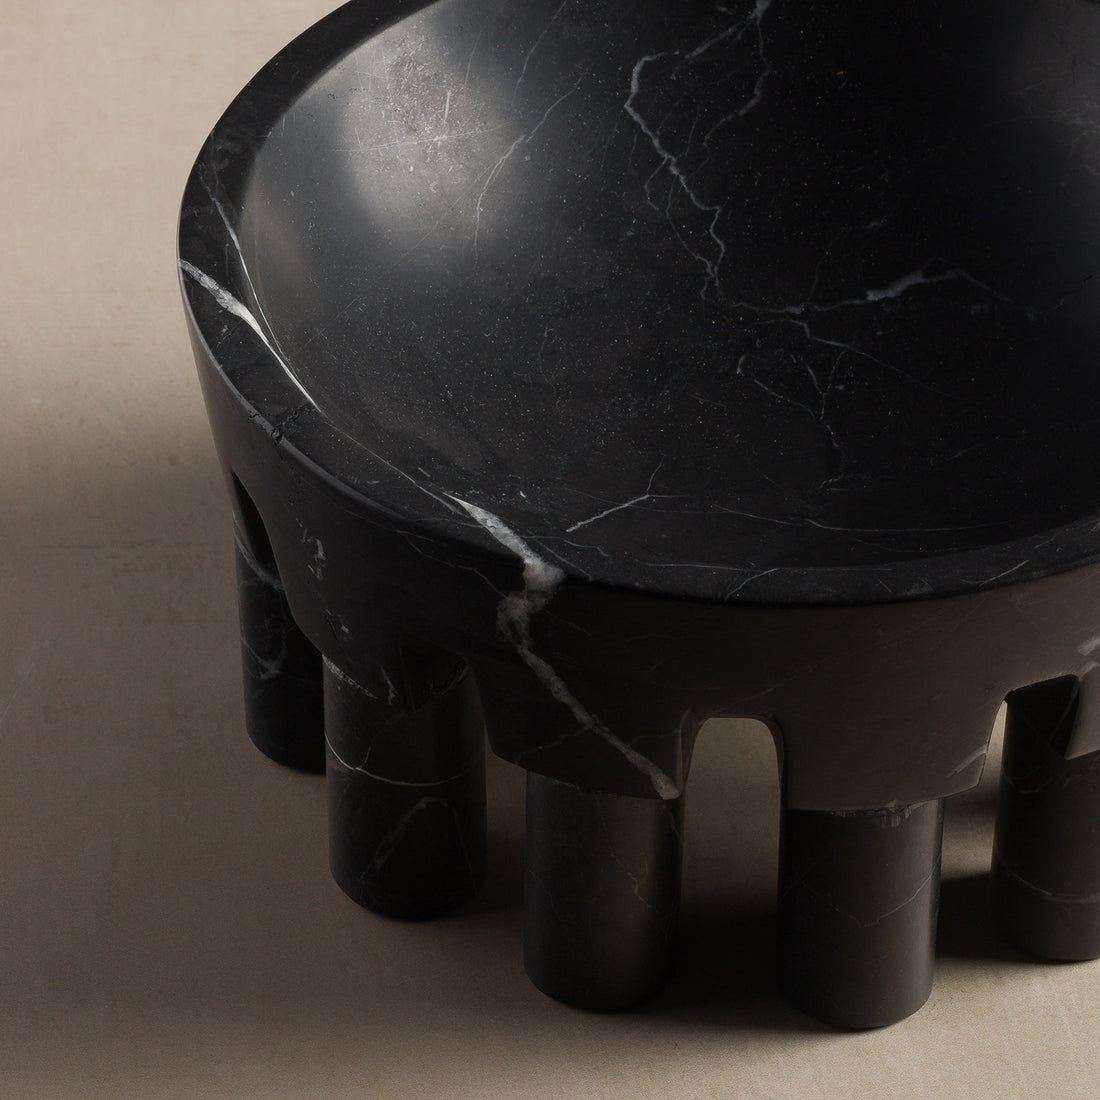 Pomona bowl made from black marble for holding fruit in a kitchen or decorative objects